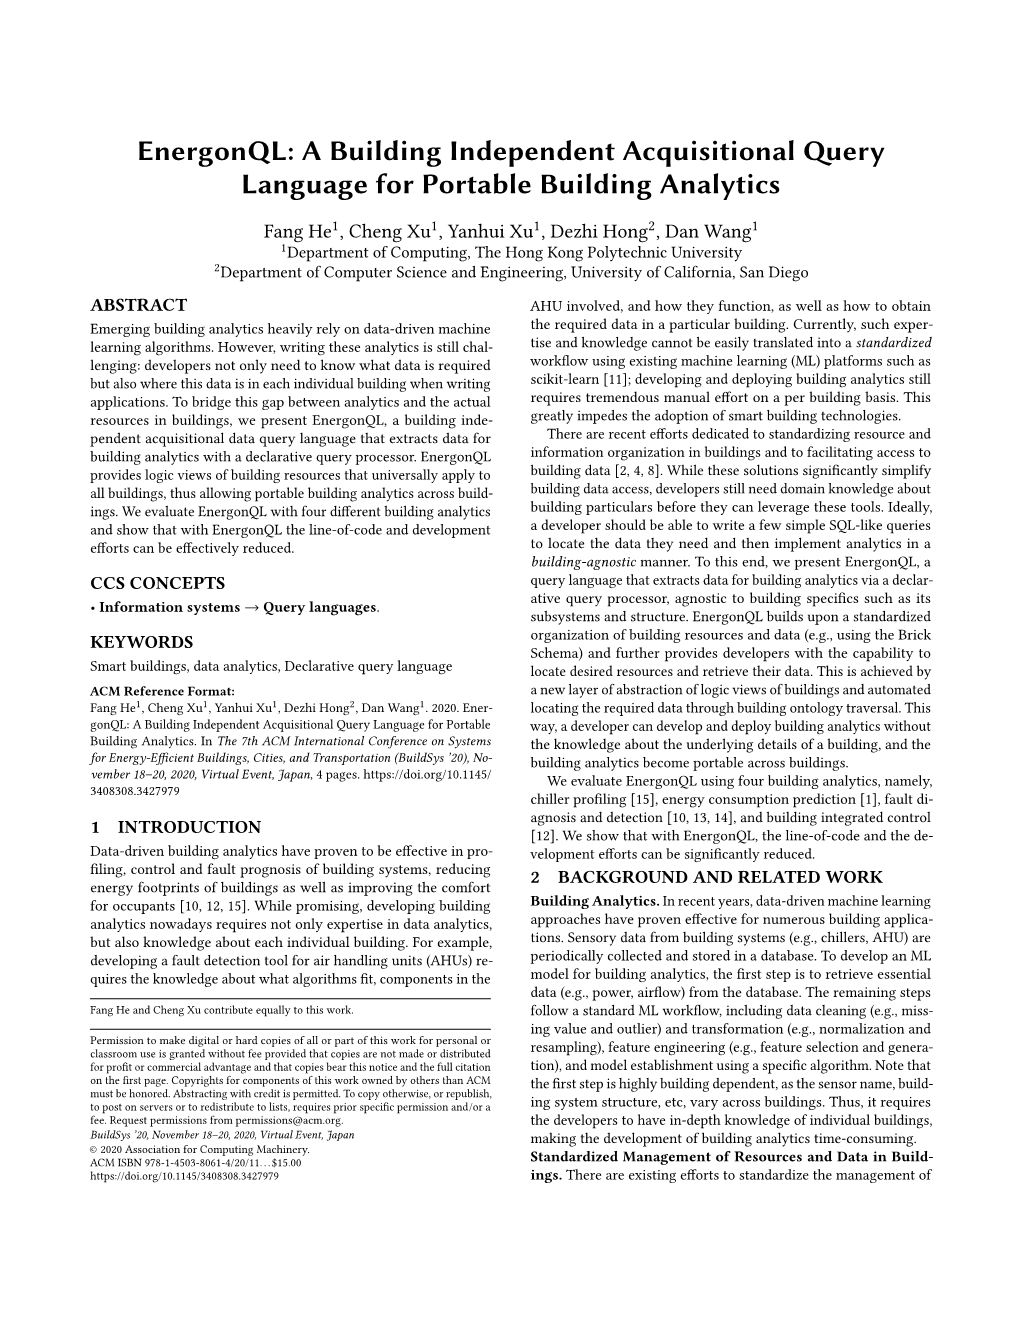 A Building Independent Acquisitional Query Language for Portable Building Analytics